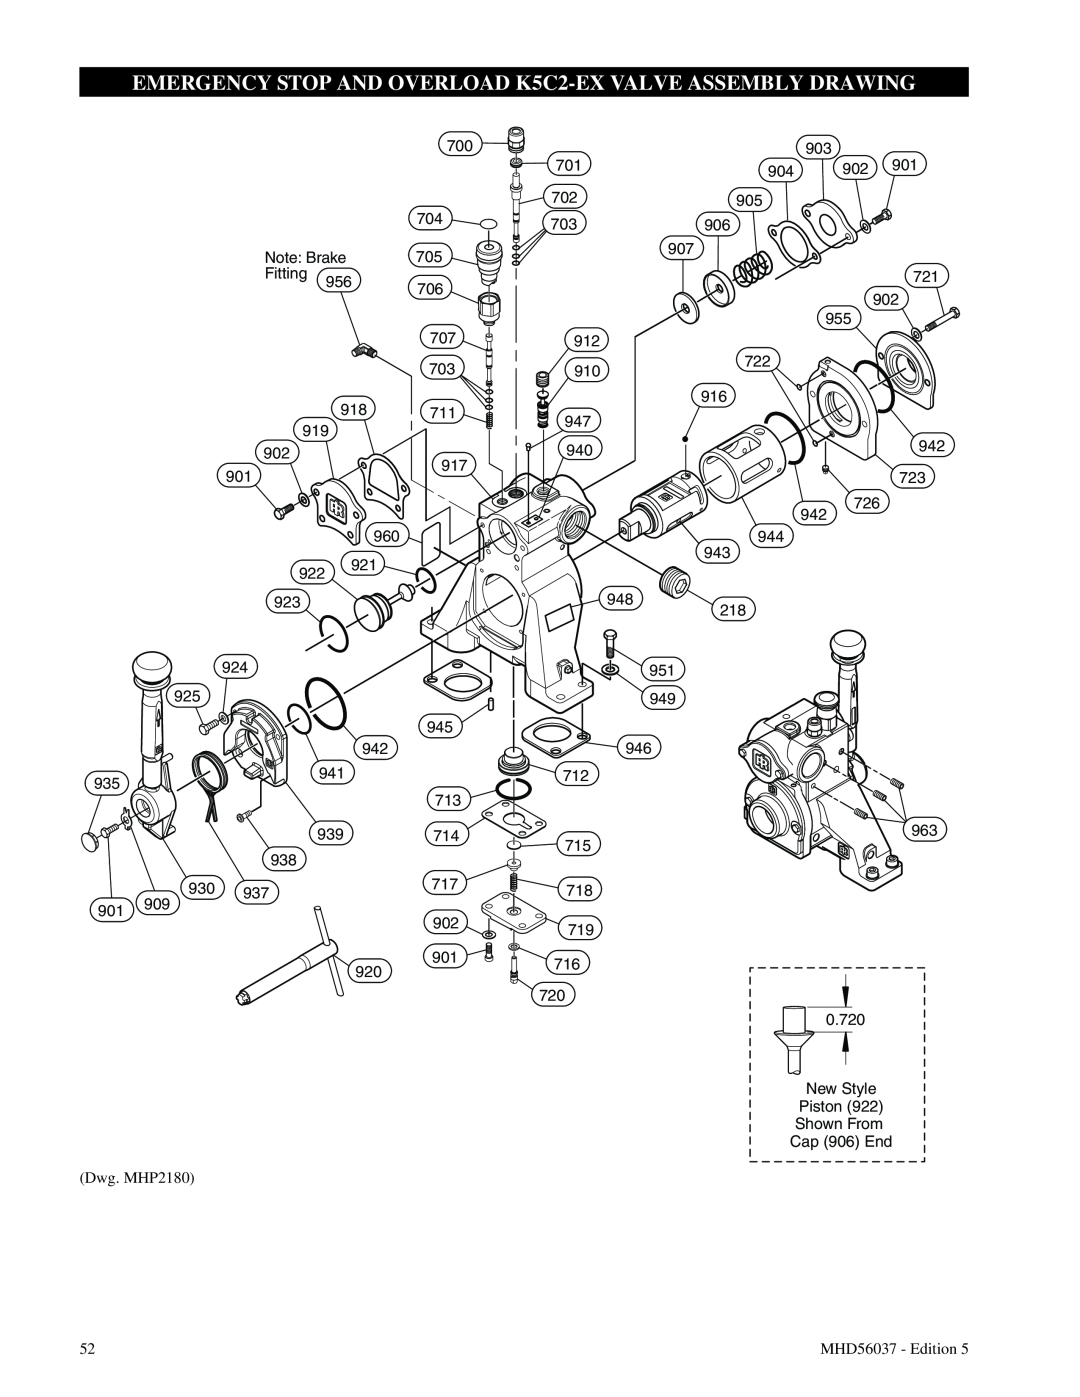 Ingersoll-Rand FA5T manual EMERGENCY STOP AND OVERLOAD K5C2-EX VALVE ASSEMBLY DRAWING, Dwg. MHP2180 